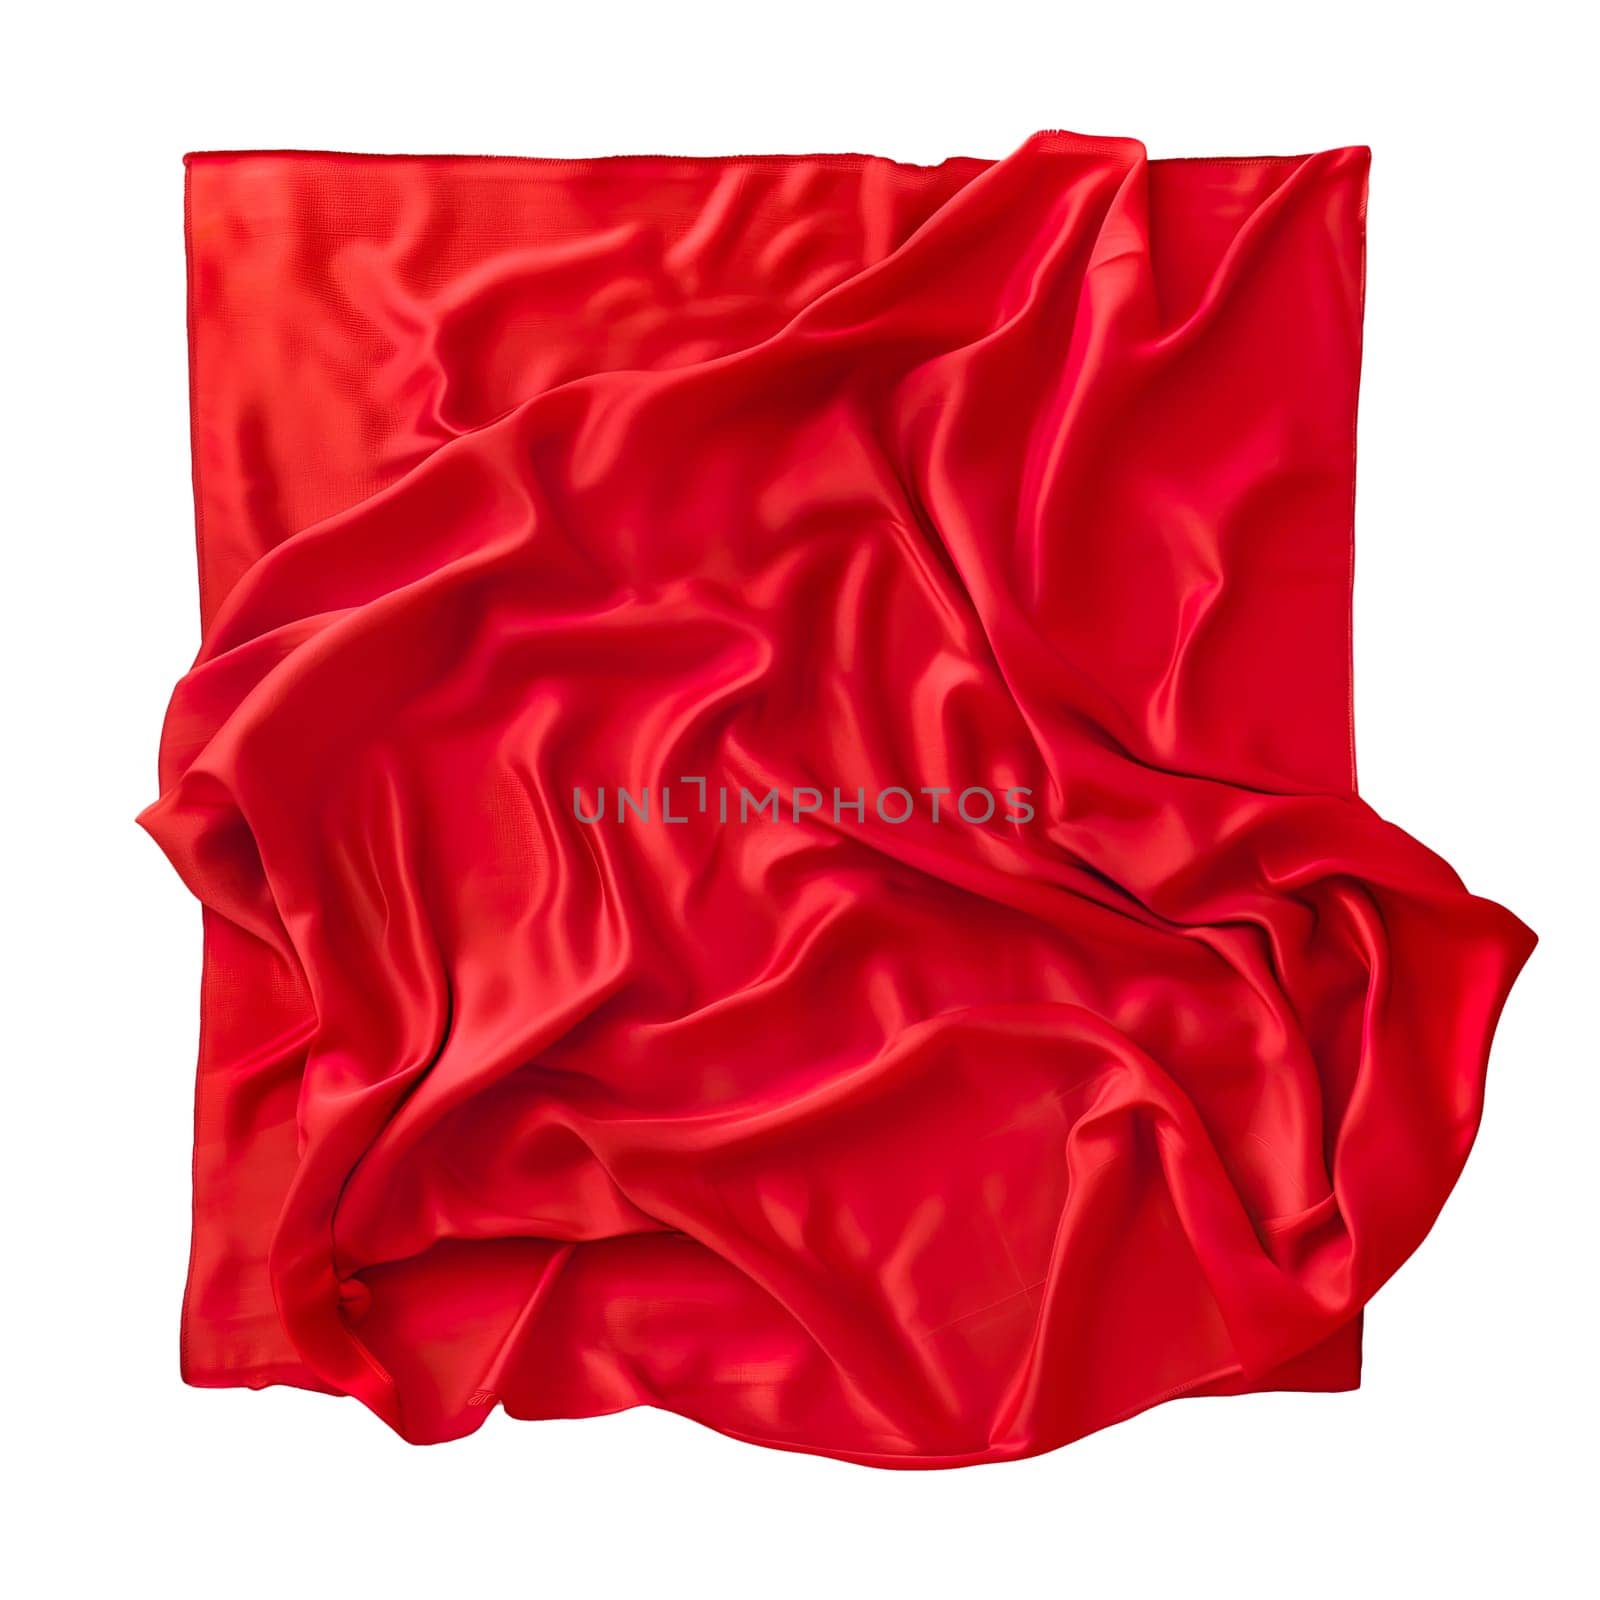 Red silk shiny cloth crumpled square material by Dustick